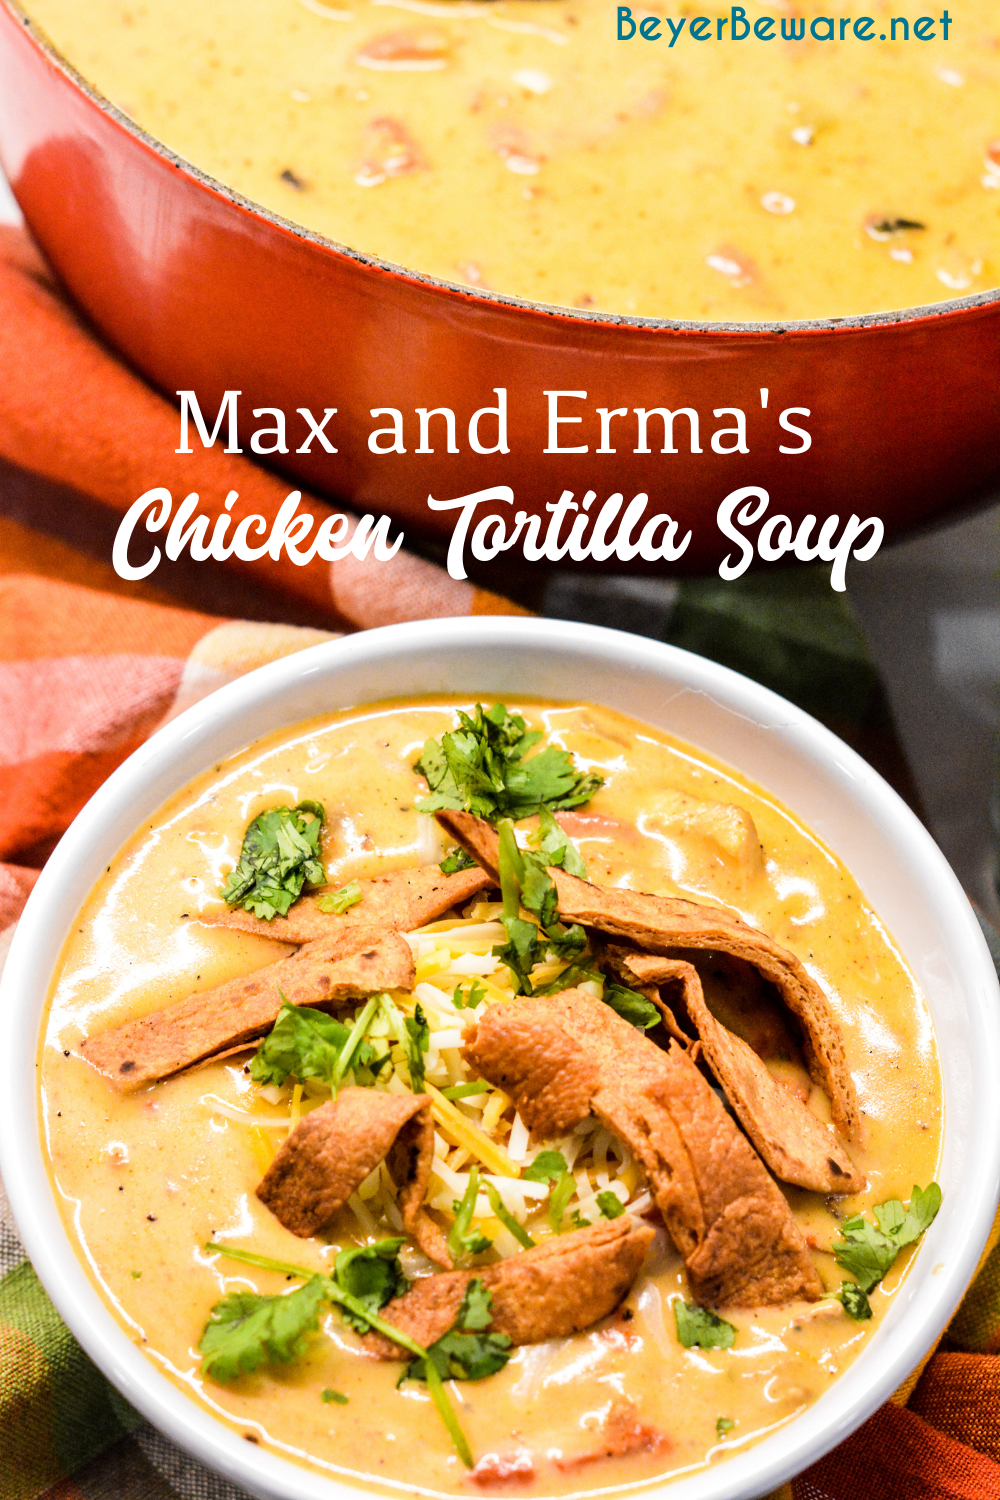 30-minute chicken tortilla soup is by far one of my family's favorite chicken soups and is the copycat recipe of the restaurant Max and Erma's chicken tortilla soup. This chicken tortilla soup is made with lots of cheese including velveeta, grilled chicken, and has lots of flavor from onions, garlic, green chilis and fire roasted tomatoes.